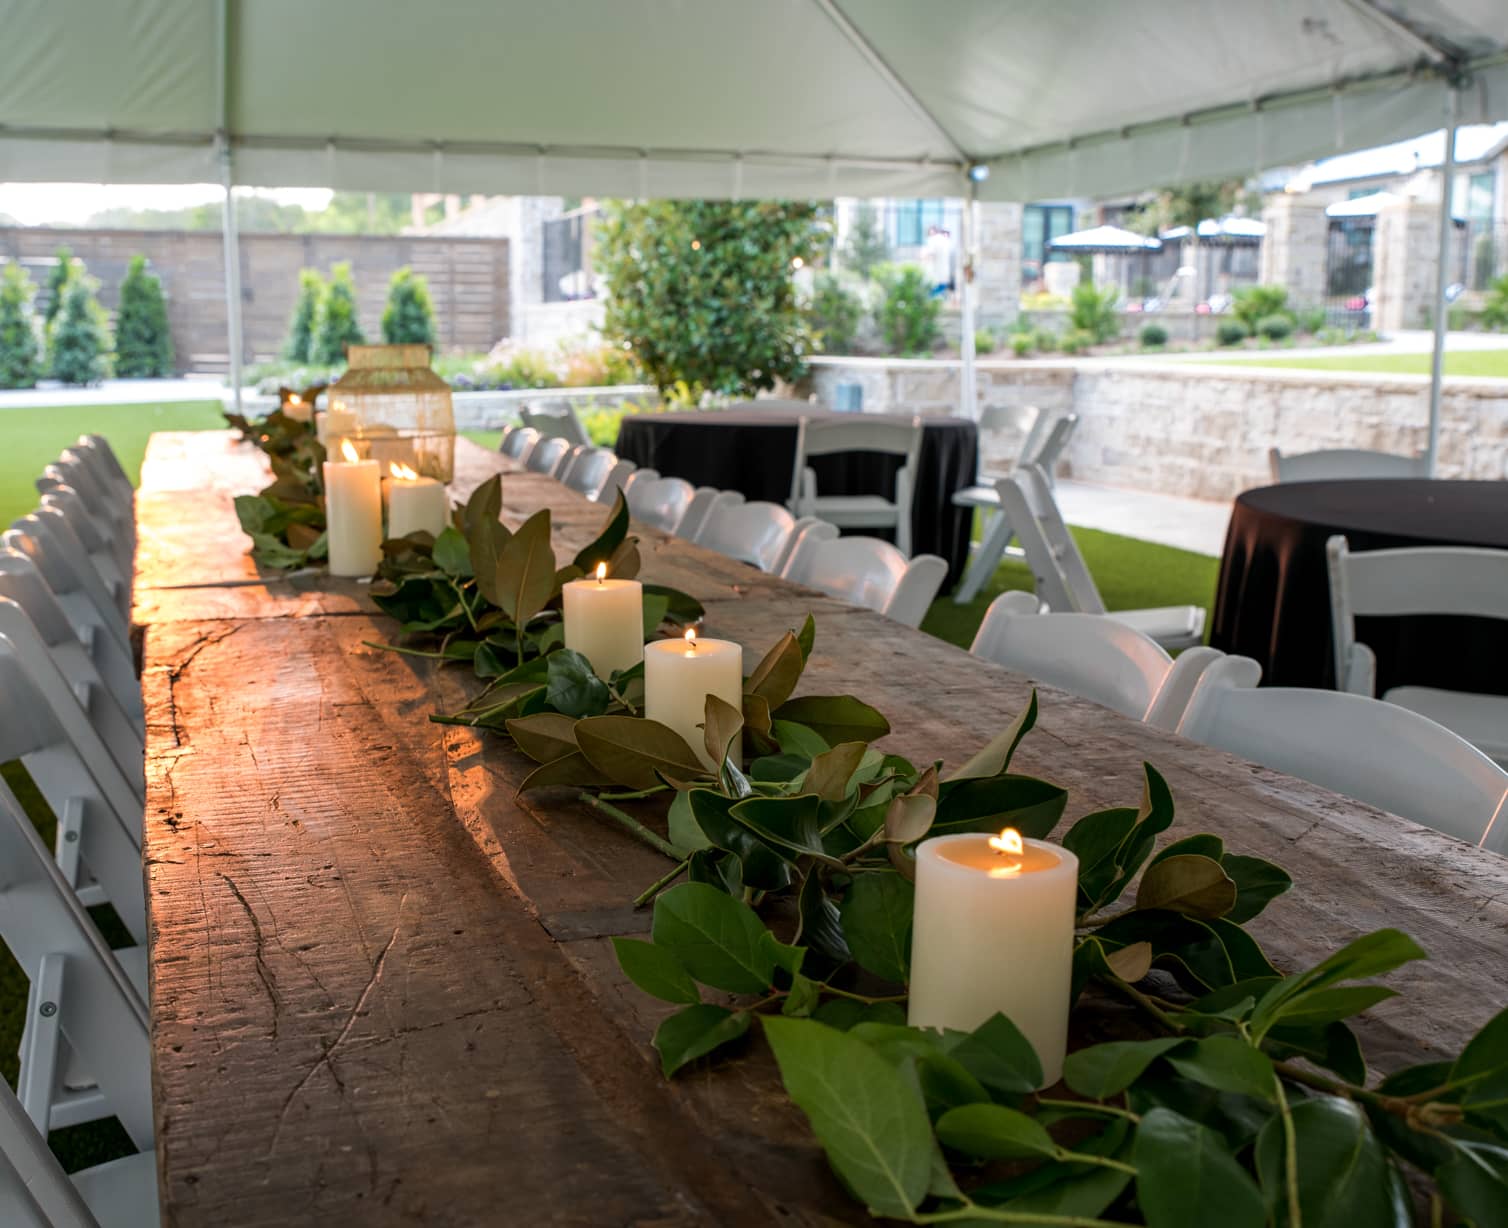 Reception table set with candles and leaves